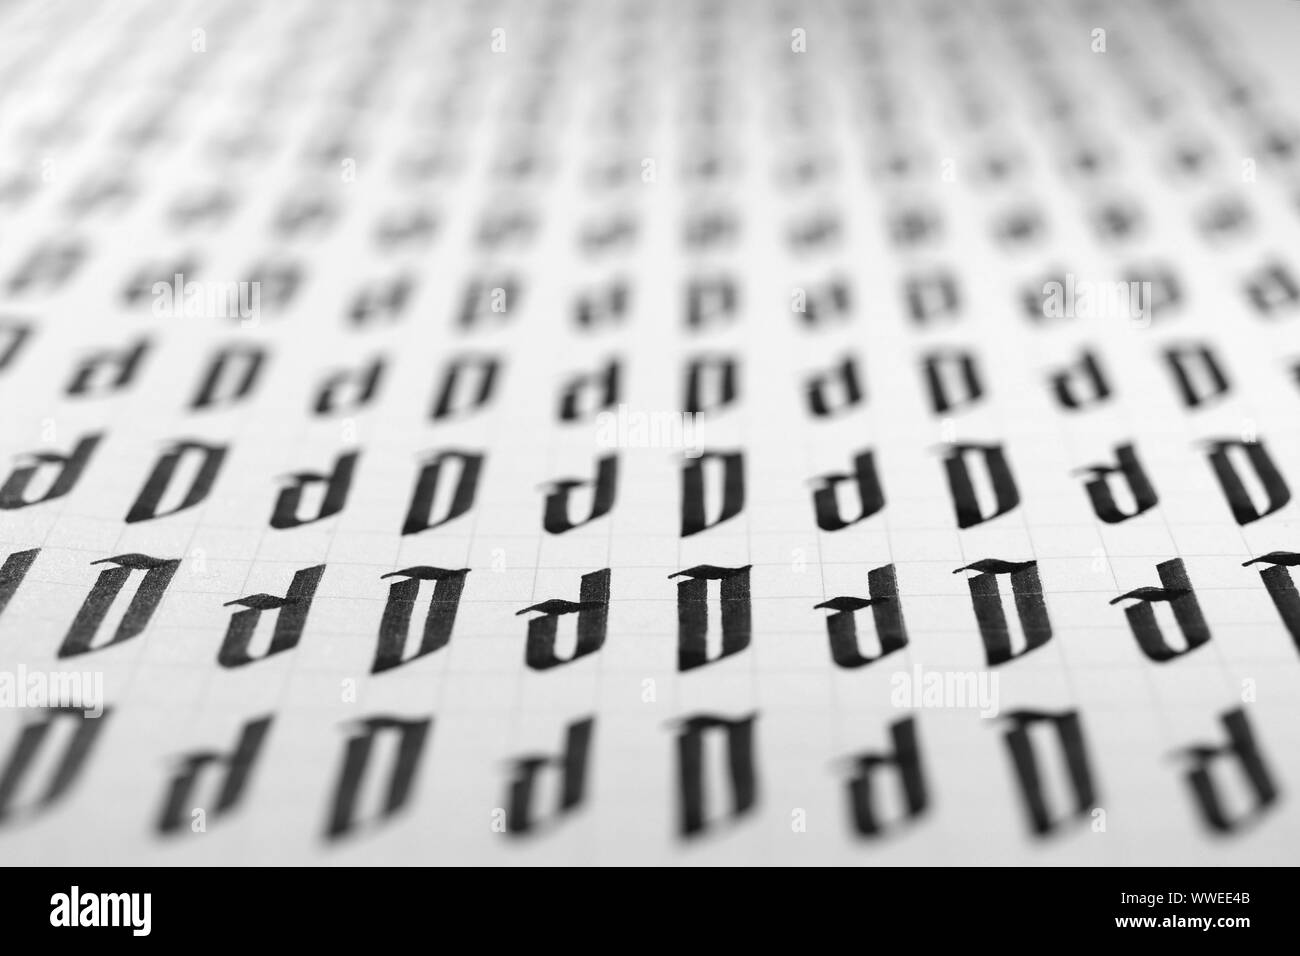 Calligraphy black and white letters D background. Lettering practice writing worksheet. Handwriting symbol filling pattern. Calligraphic letter D lear Stock Photo